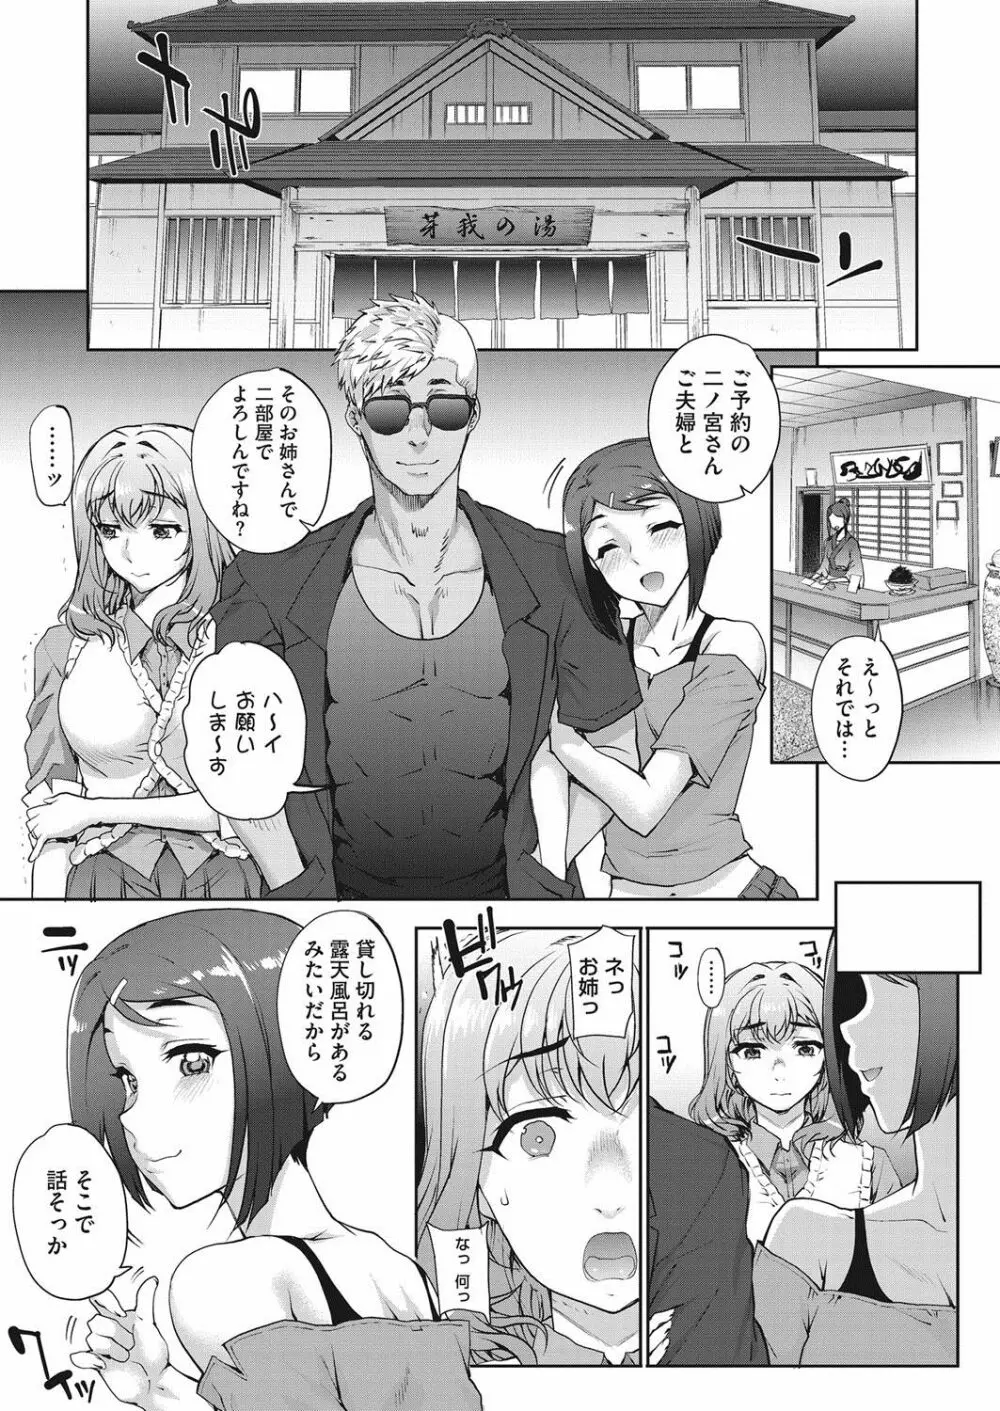 [Carn] Tanshinfunin ~Sisters~ Ch 1-7 58ページ